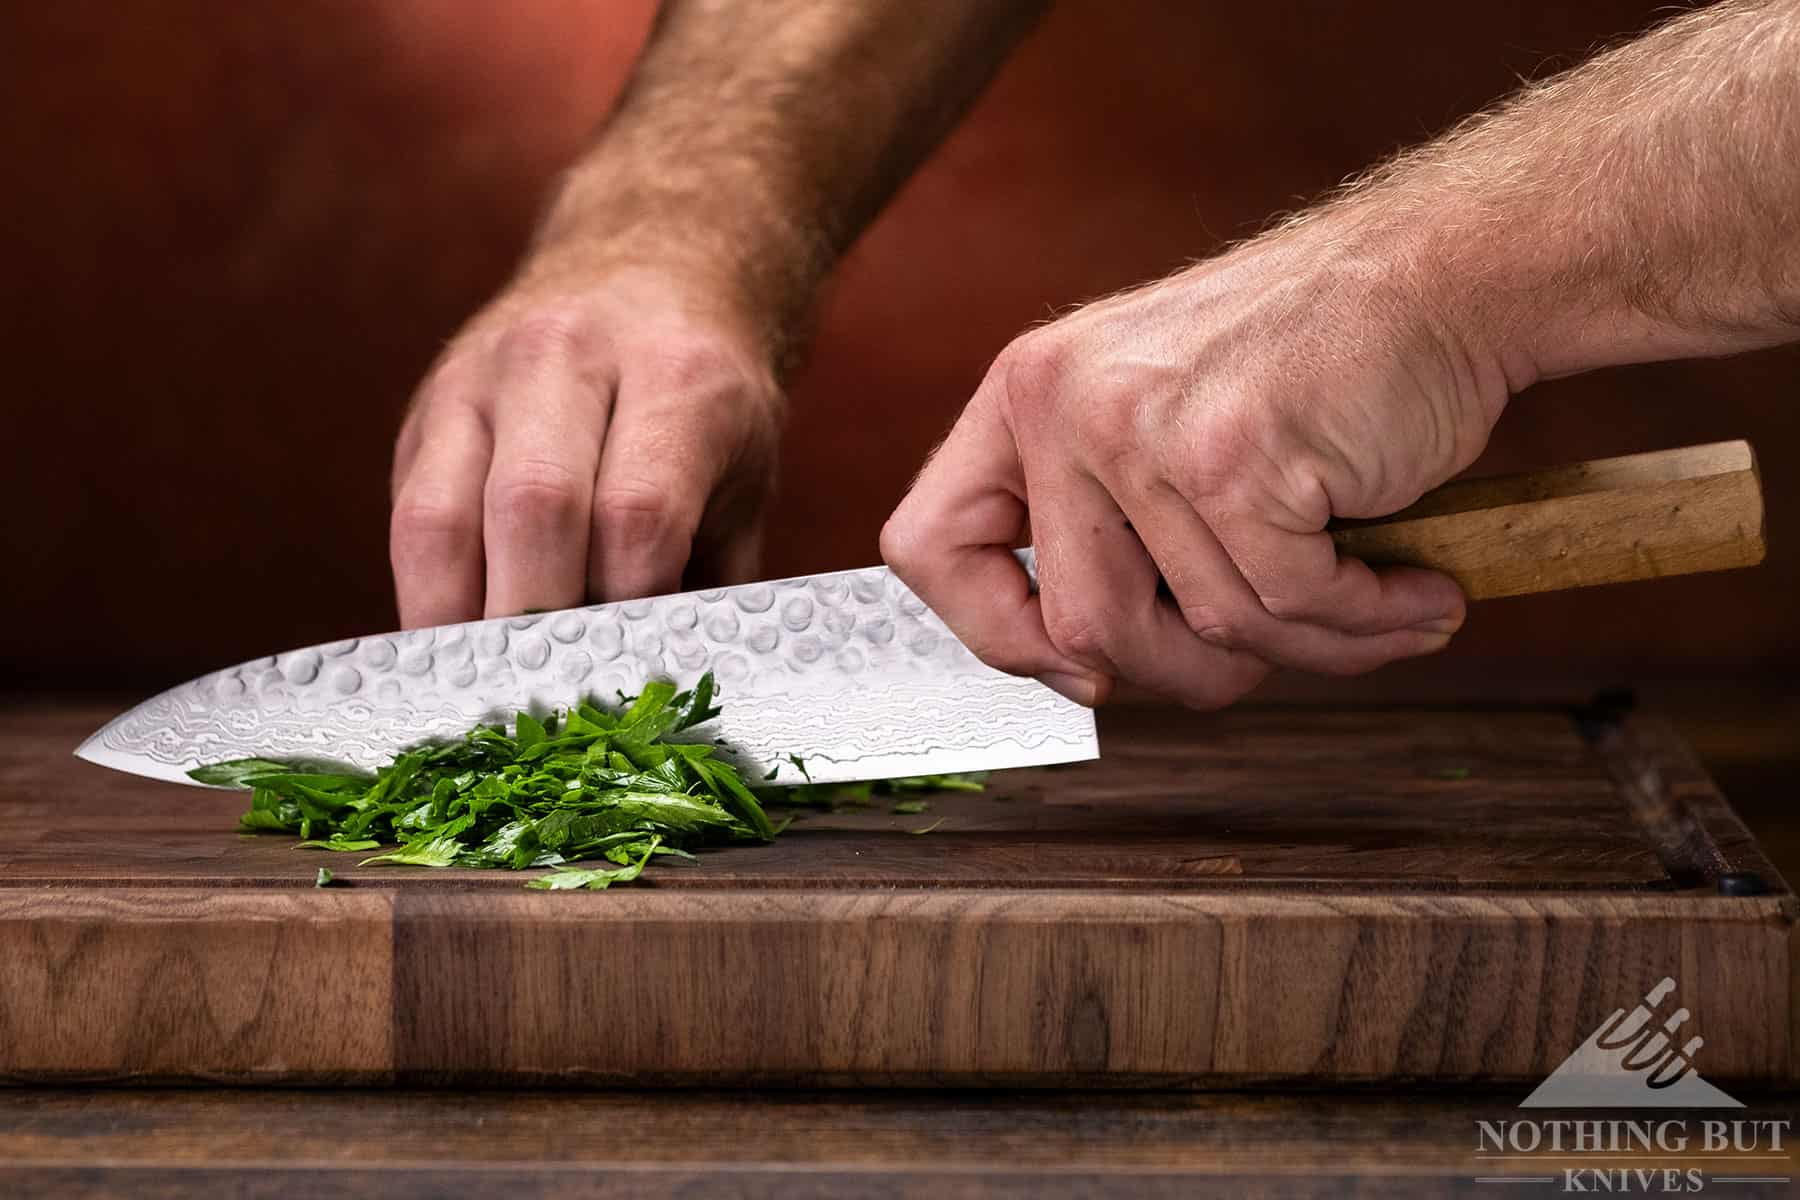 This knife is struggled a little with herbs and leafy greens, but it got the job done.  